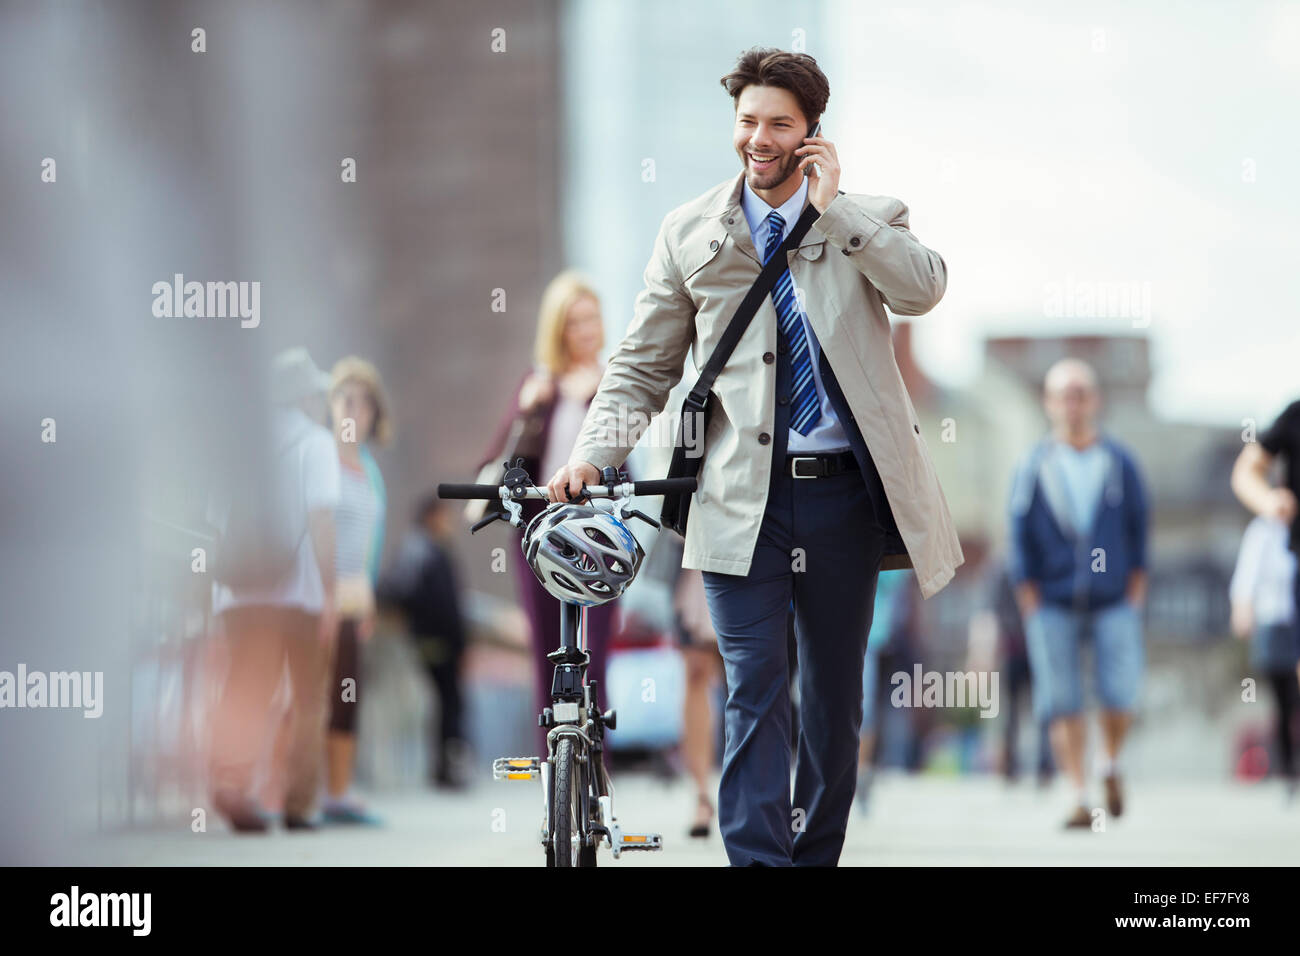 Businessman talking on cell phone pushing bicycle in city Stock Photo